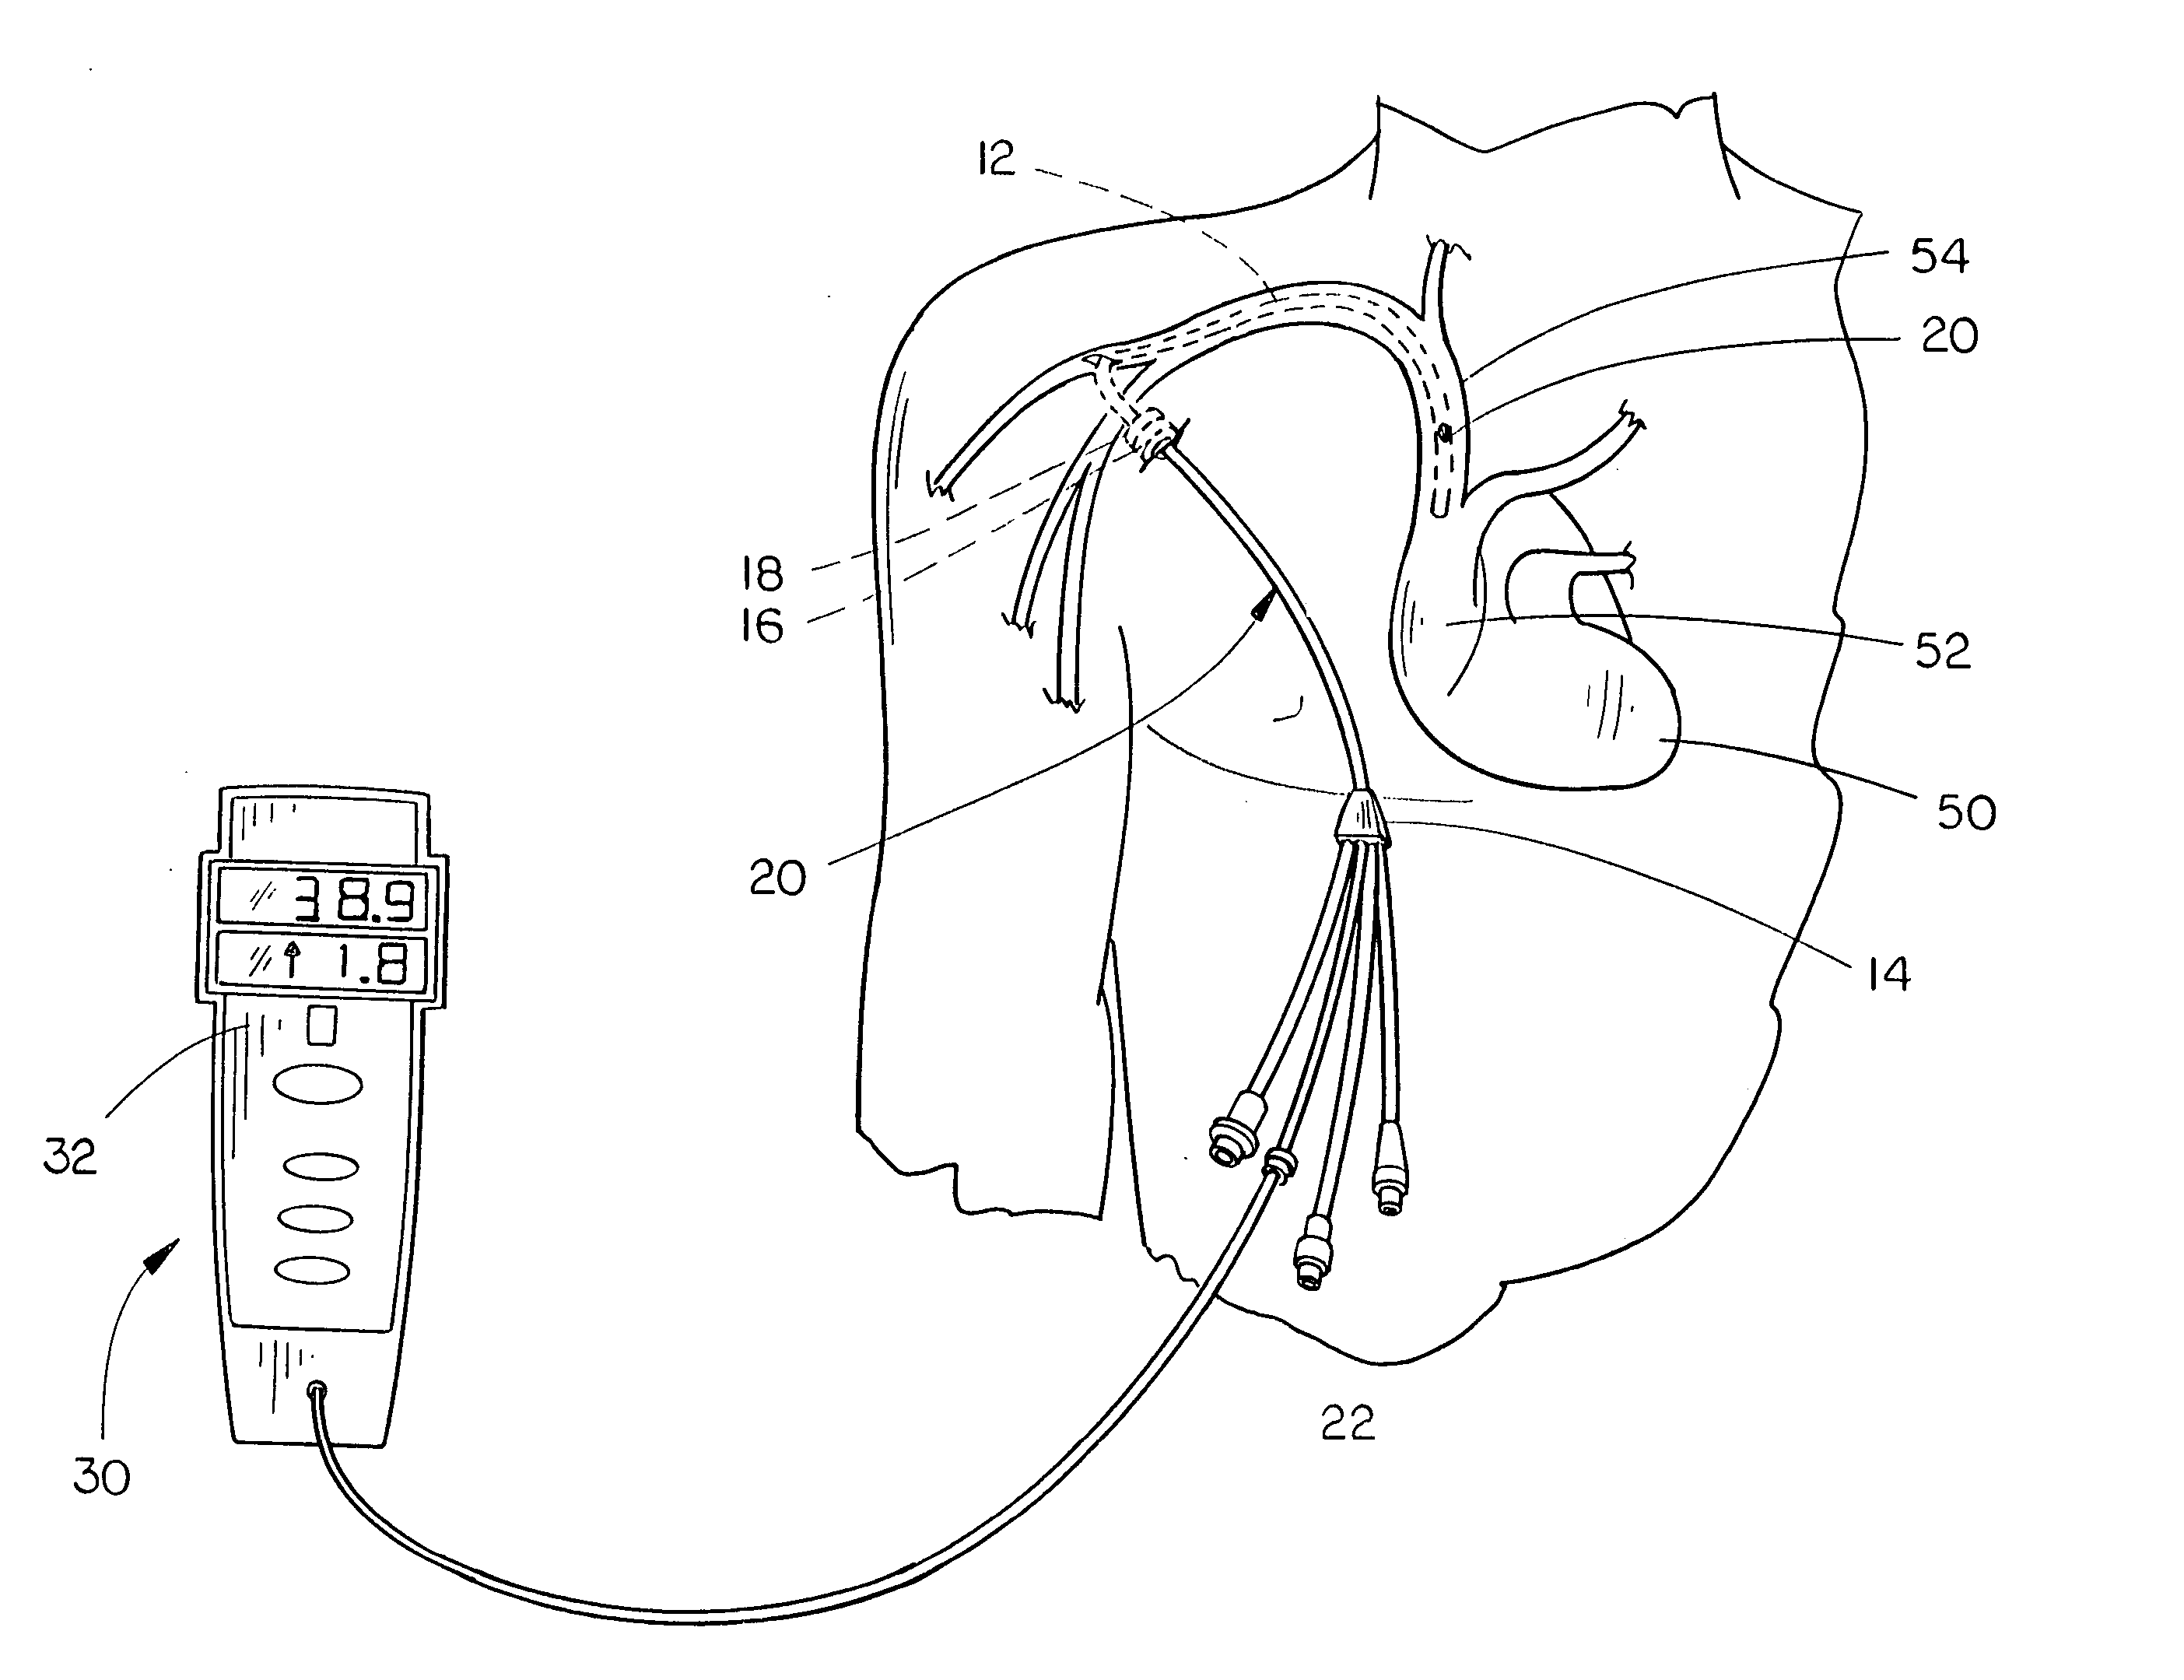 Modified hickman-type catheter with embedded thermistor